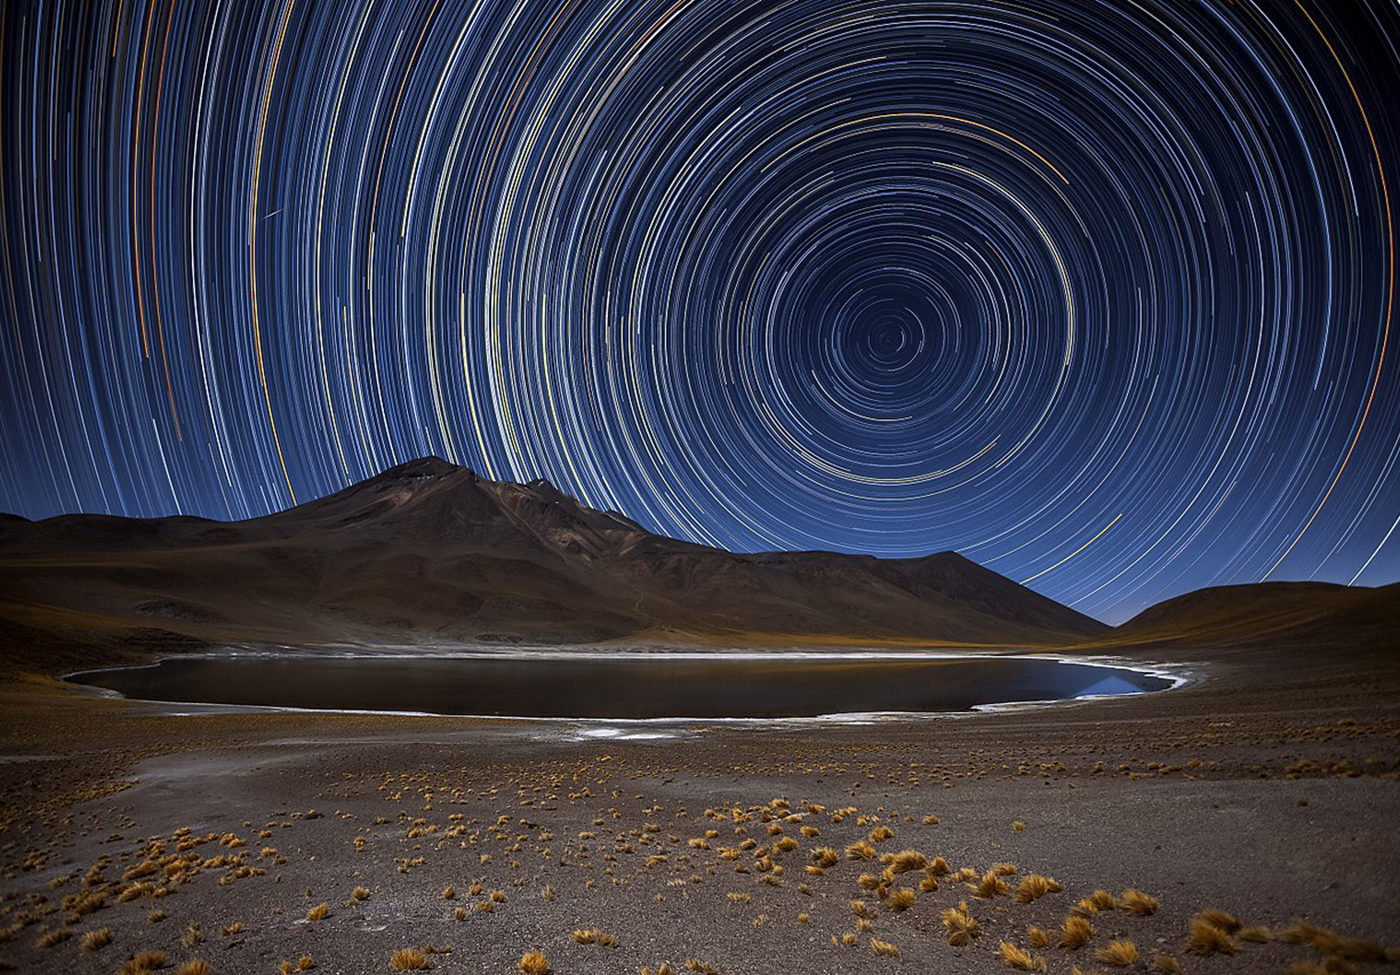 Time elapsed photo of star trails, taken in Chile's Atacama Desert, Credit: A. Duro/ESO [CC BY 4.0 (https://creativecommons.org/licenses/by/4.0)], via Wikimedia Commons.